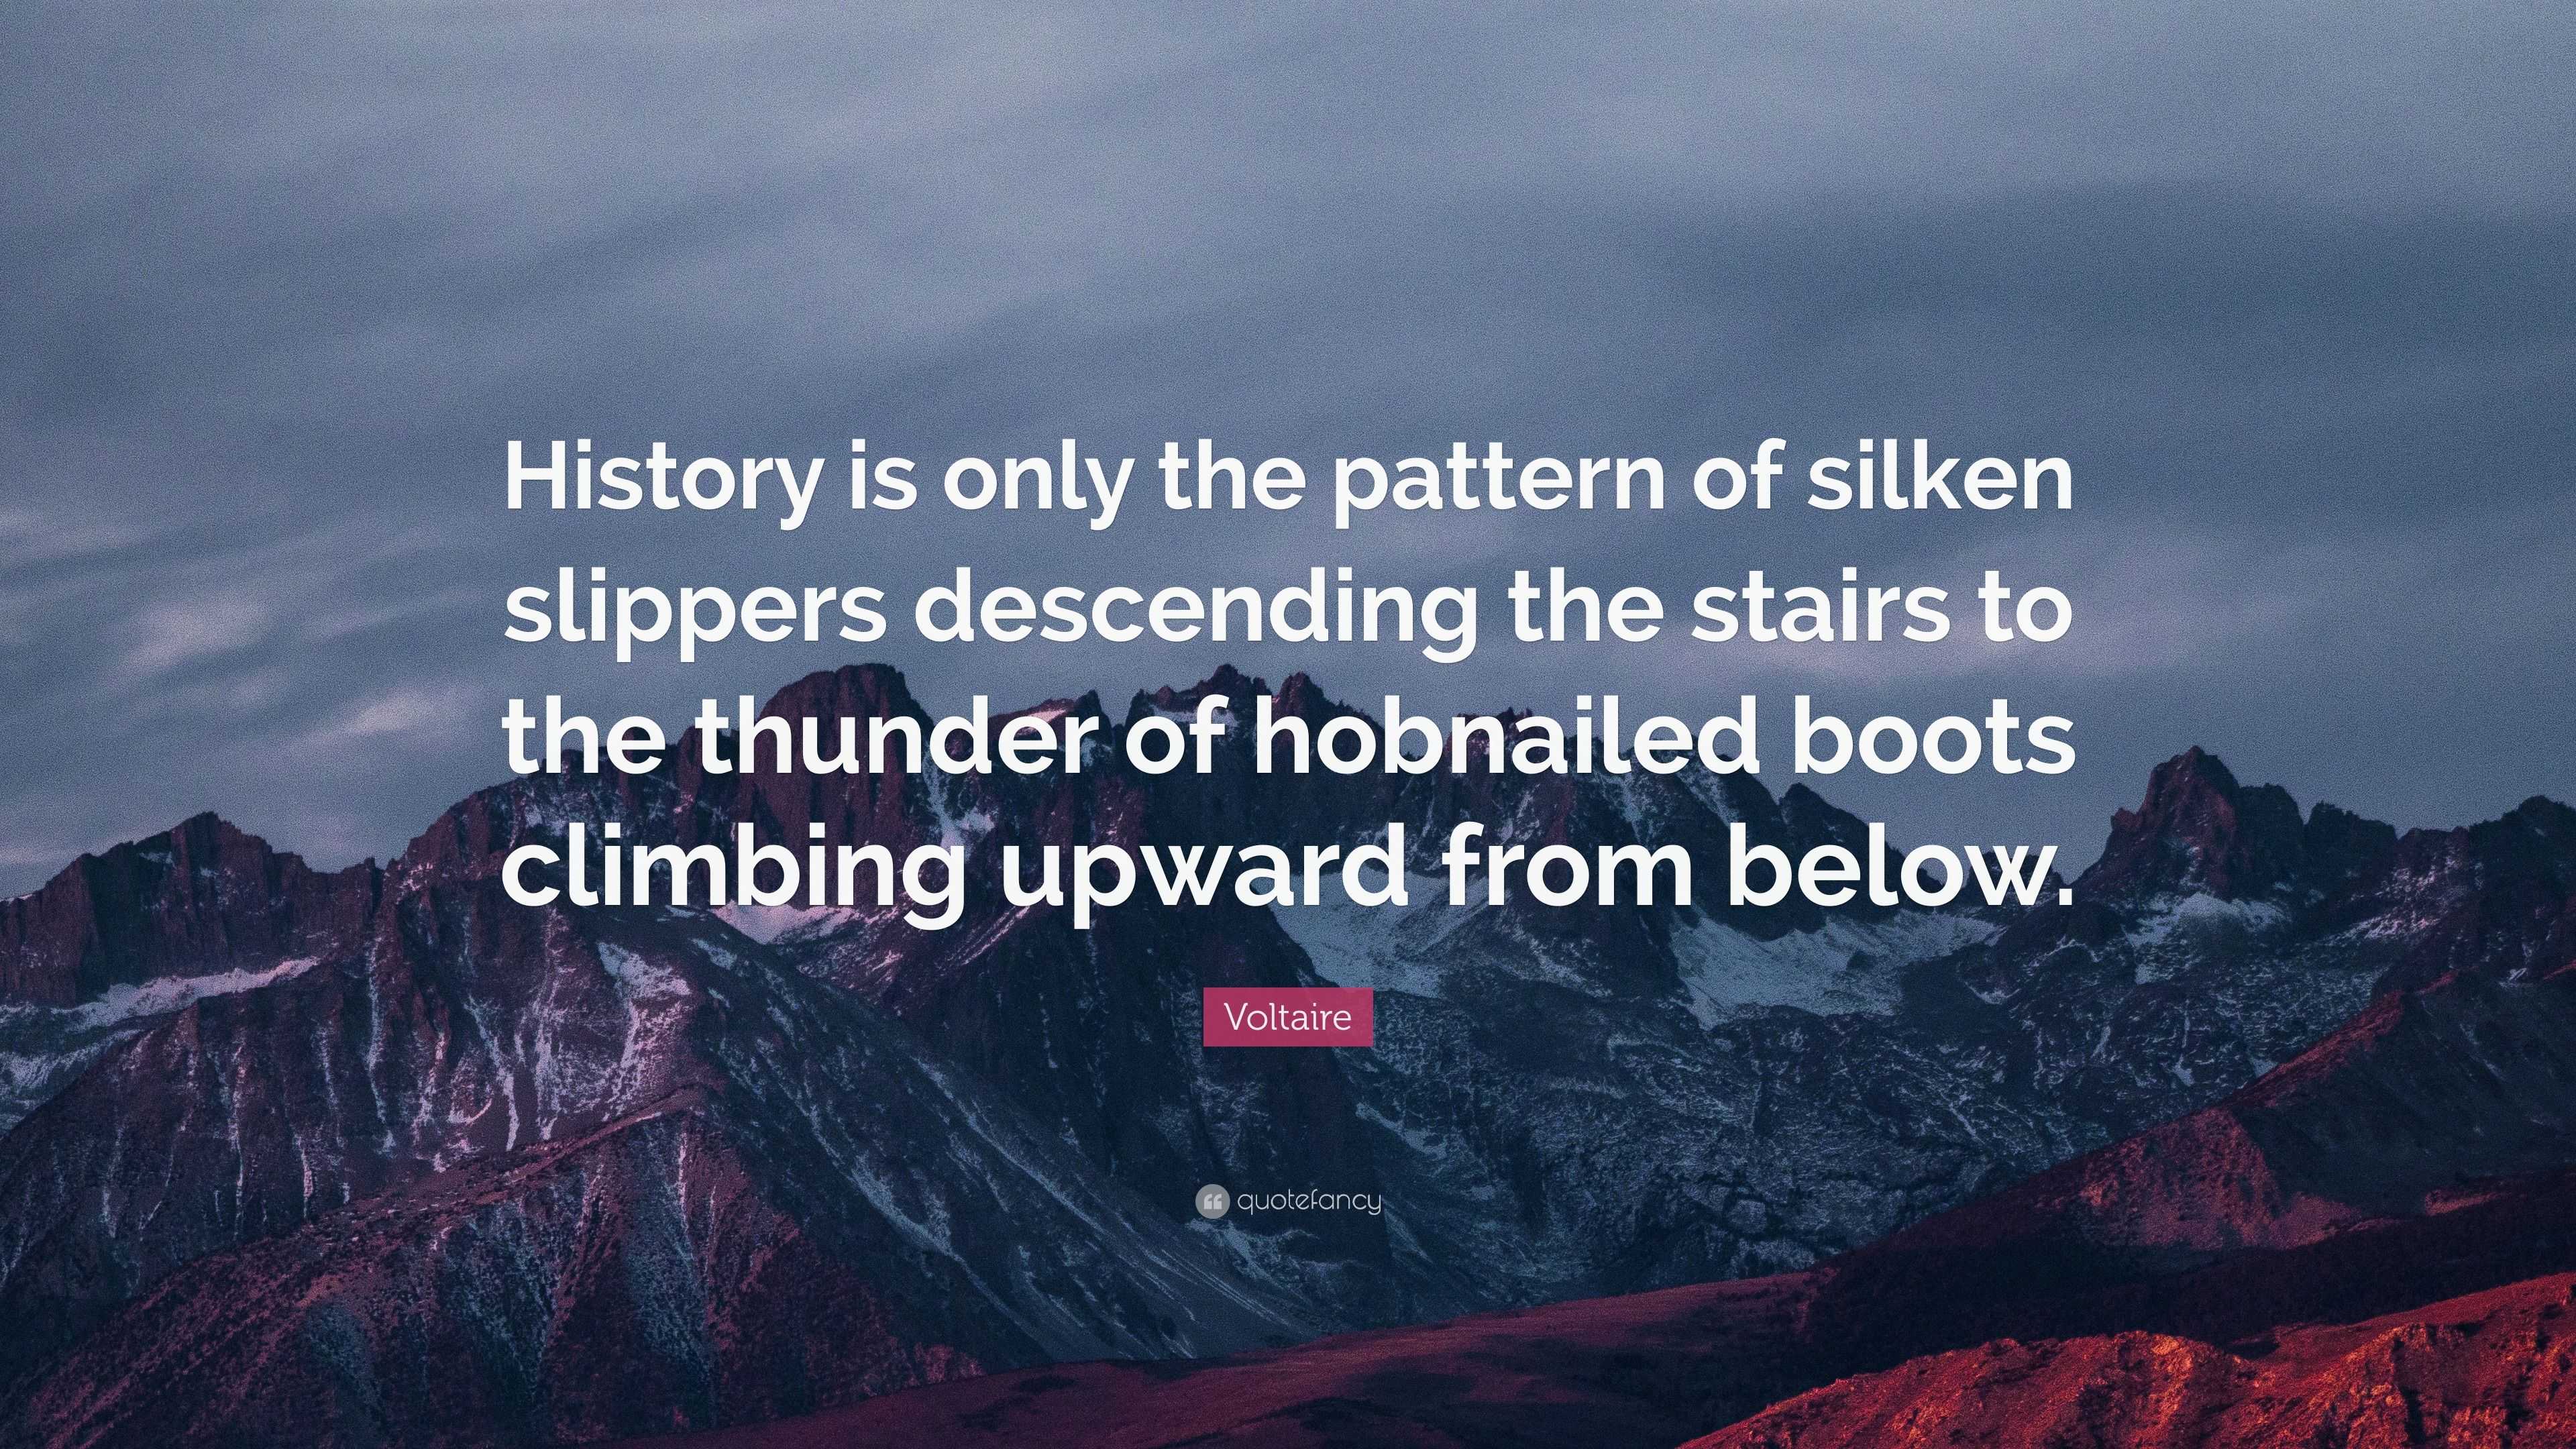 Ugyldigt kompensere Udvinding Voltaire Quote: “History is only the pattern of silken slippers descending  the stairs to the thunder of hobnailed boots climbing upward f...”